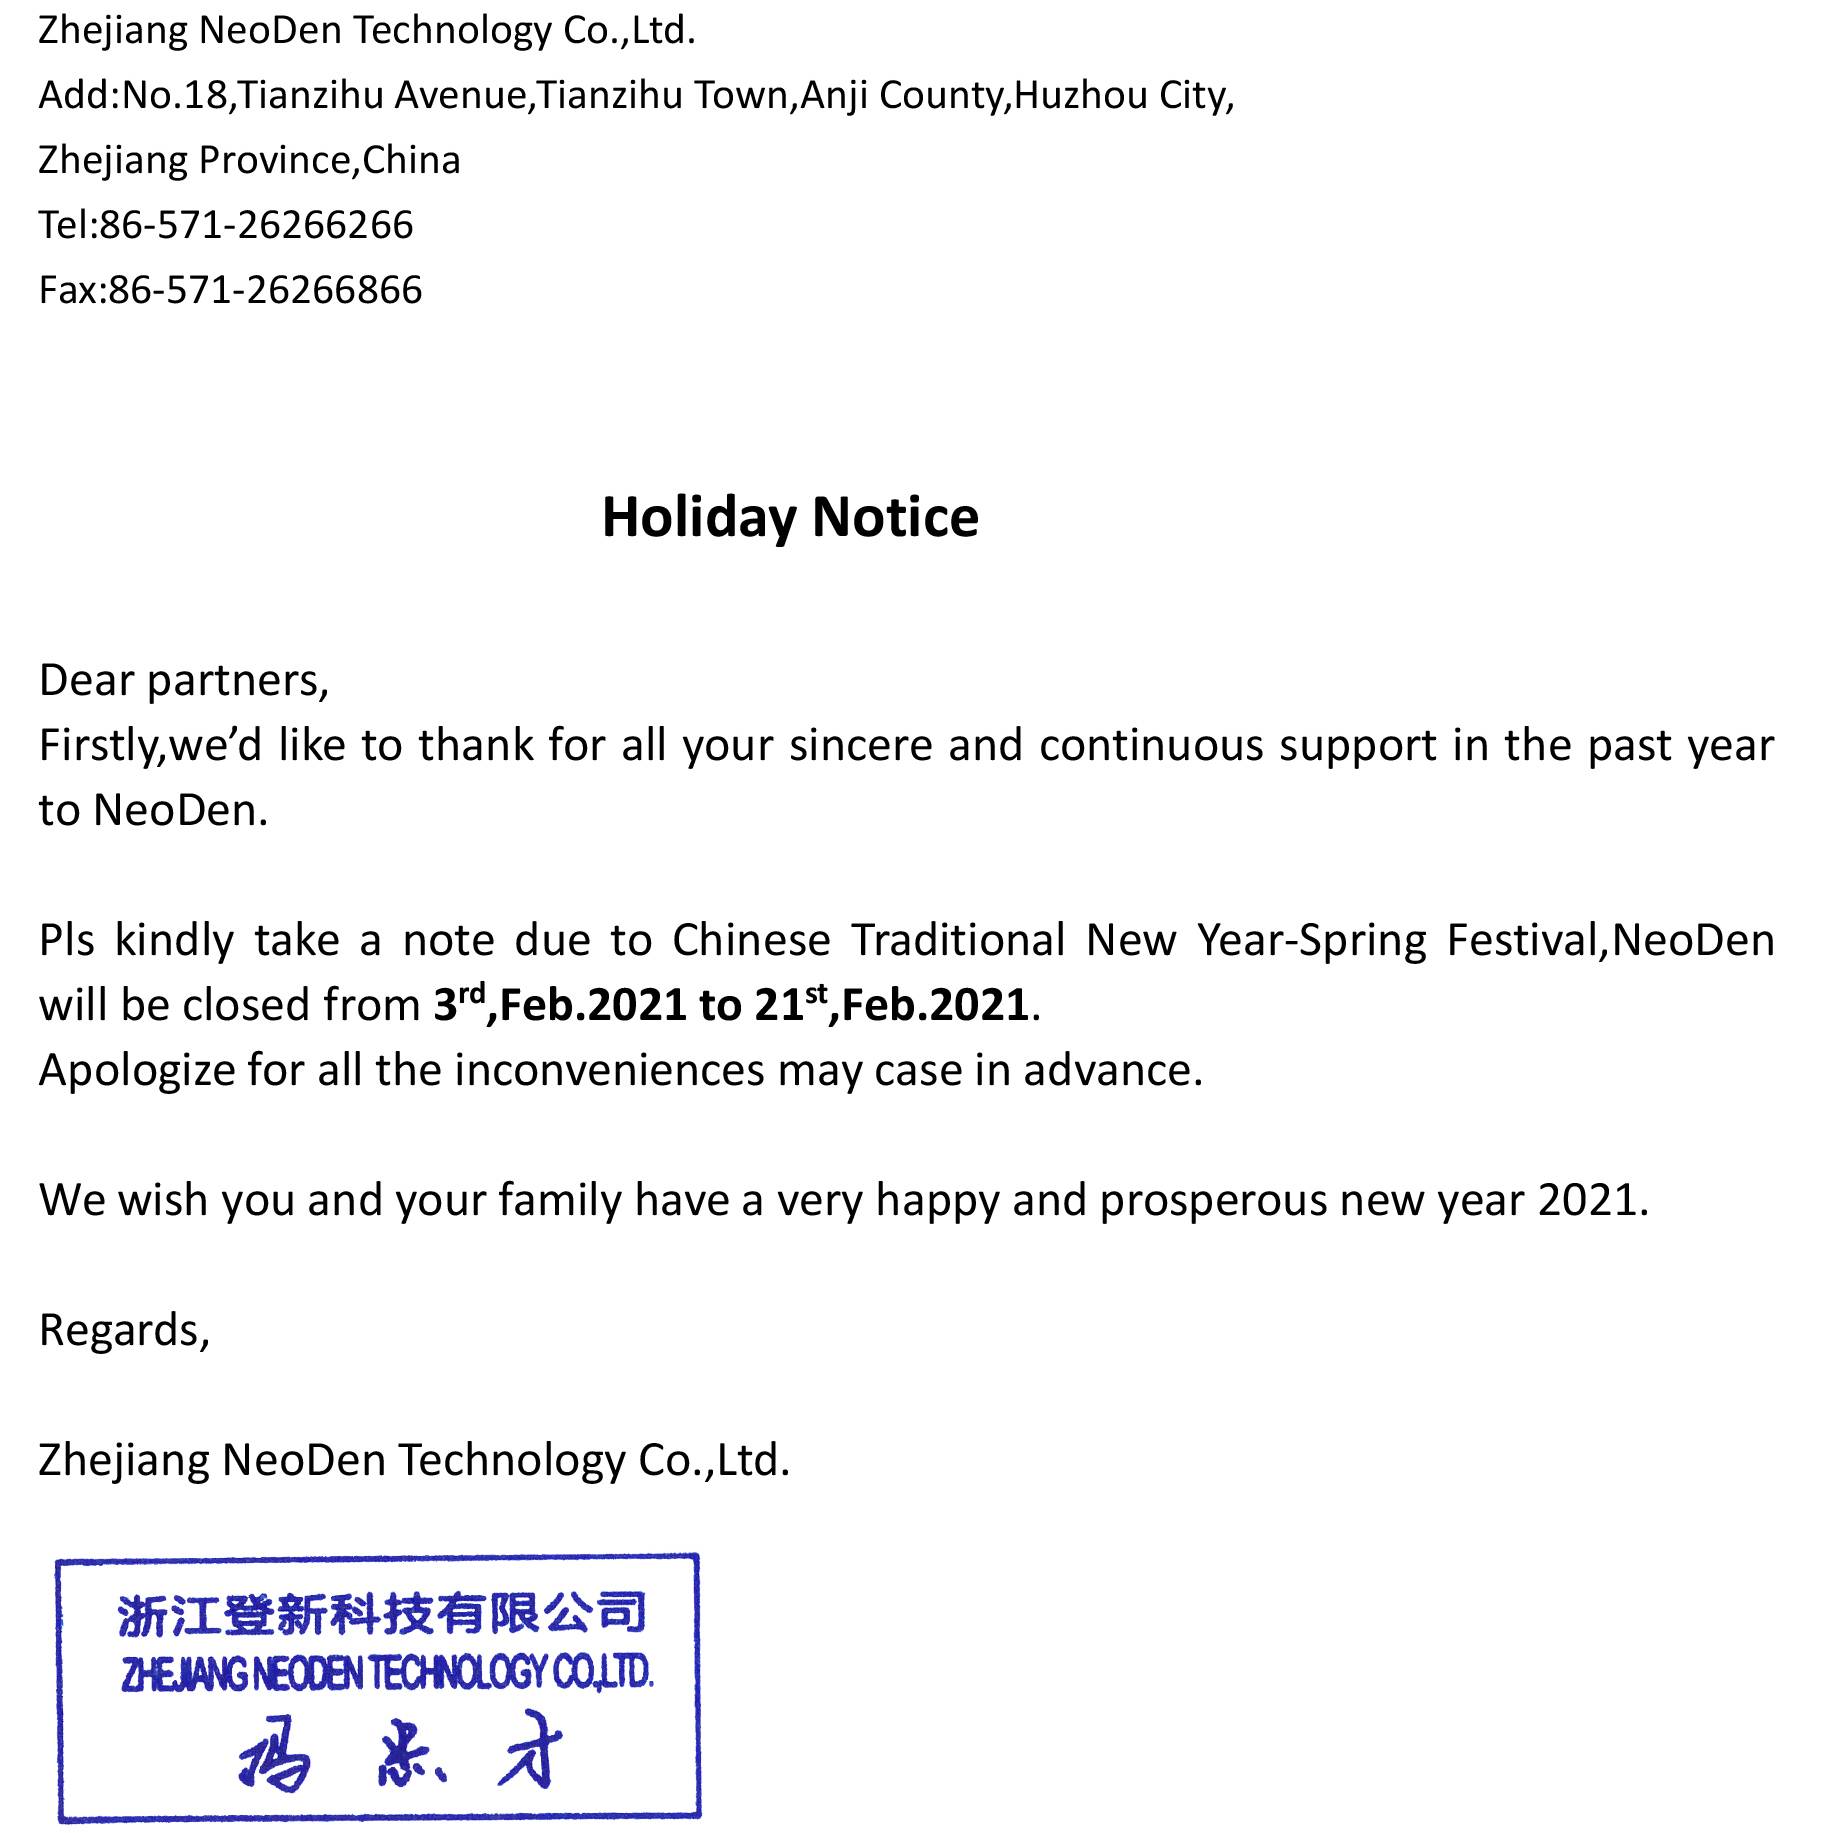 NeoDen Holiday Notice